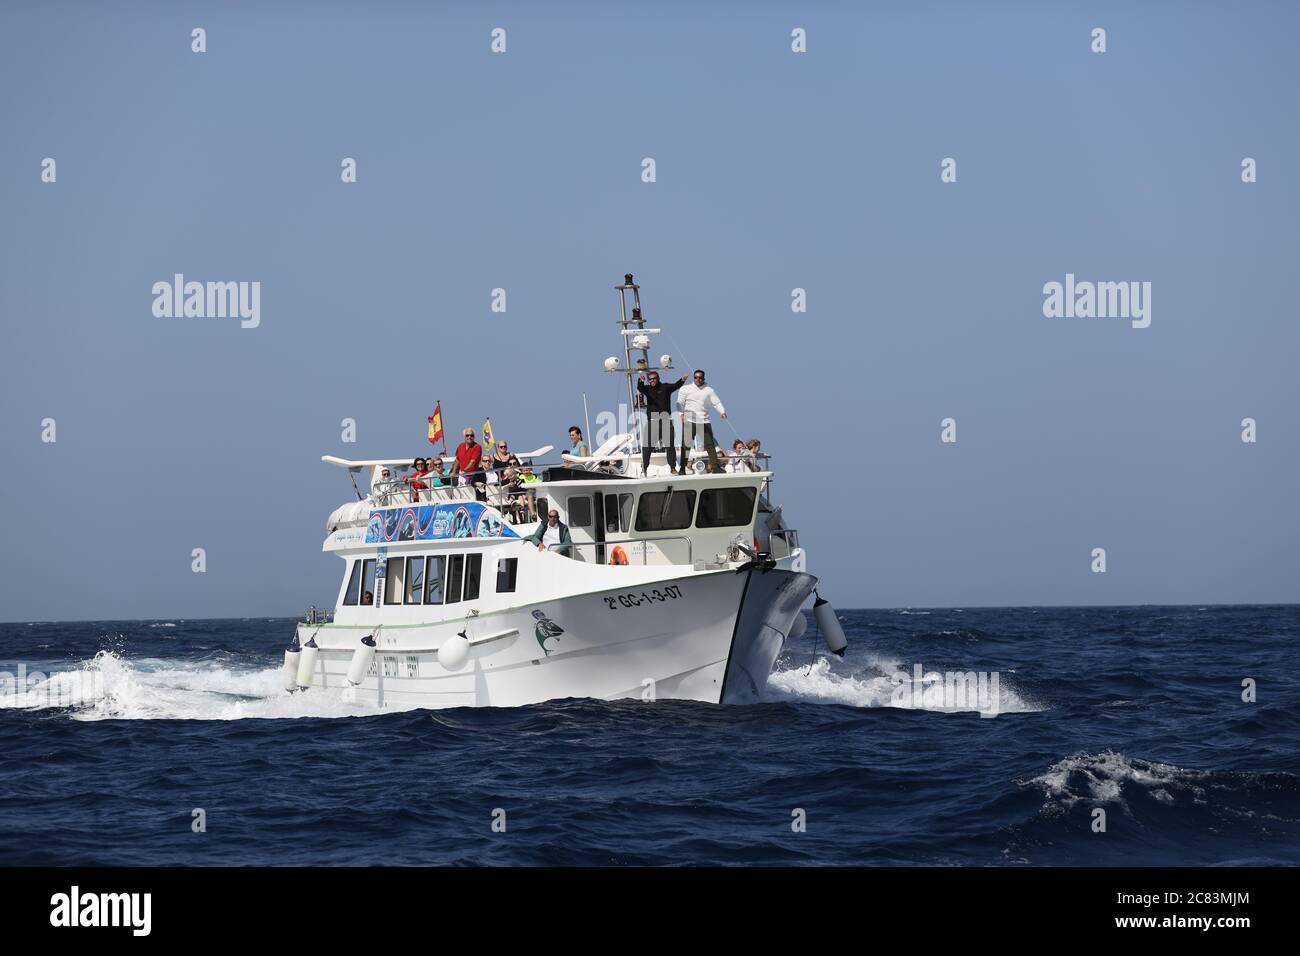 Puerto Rico,Gran Canaria,02.05.2019. Tourists enjoy dolphin/whale watching  trip in the Atlantic ocean on a glass bottom ferry by Lineas Salmon company  Stock Photo - Alamy